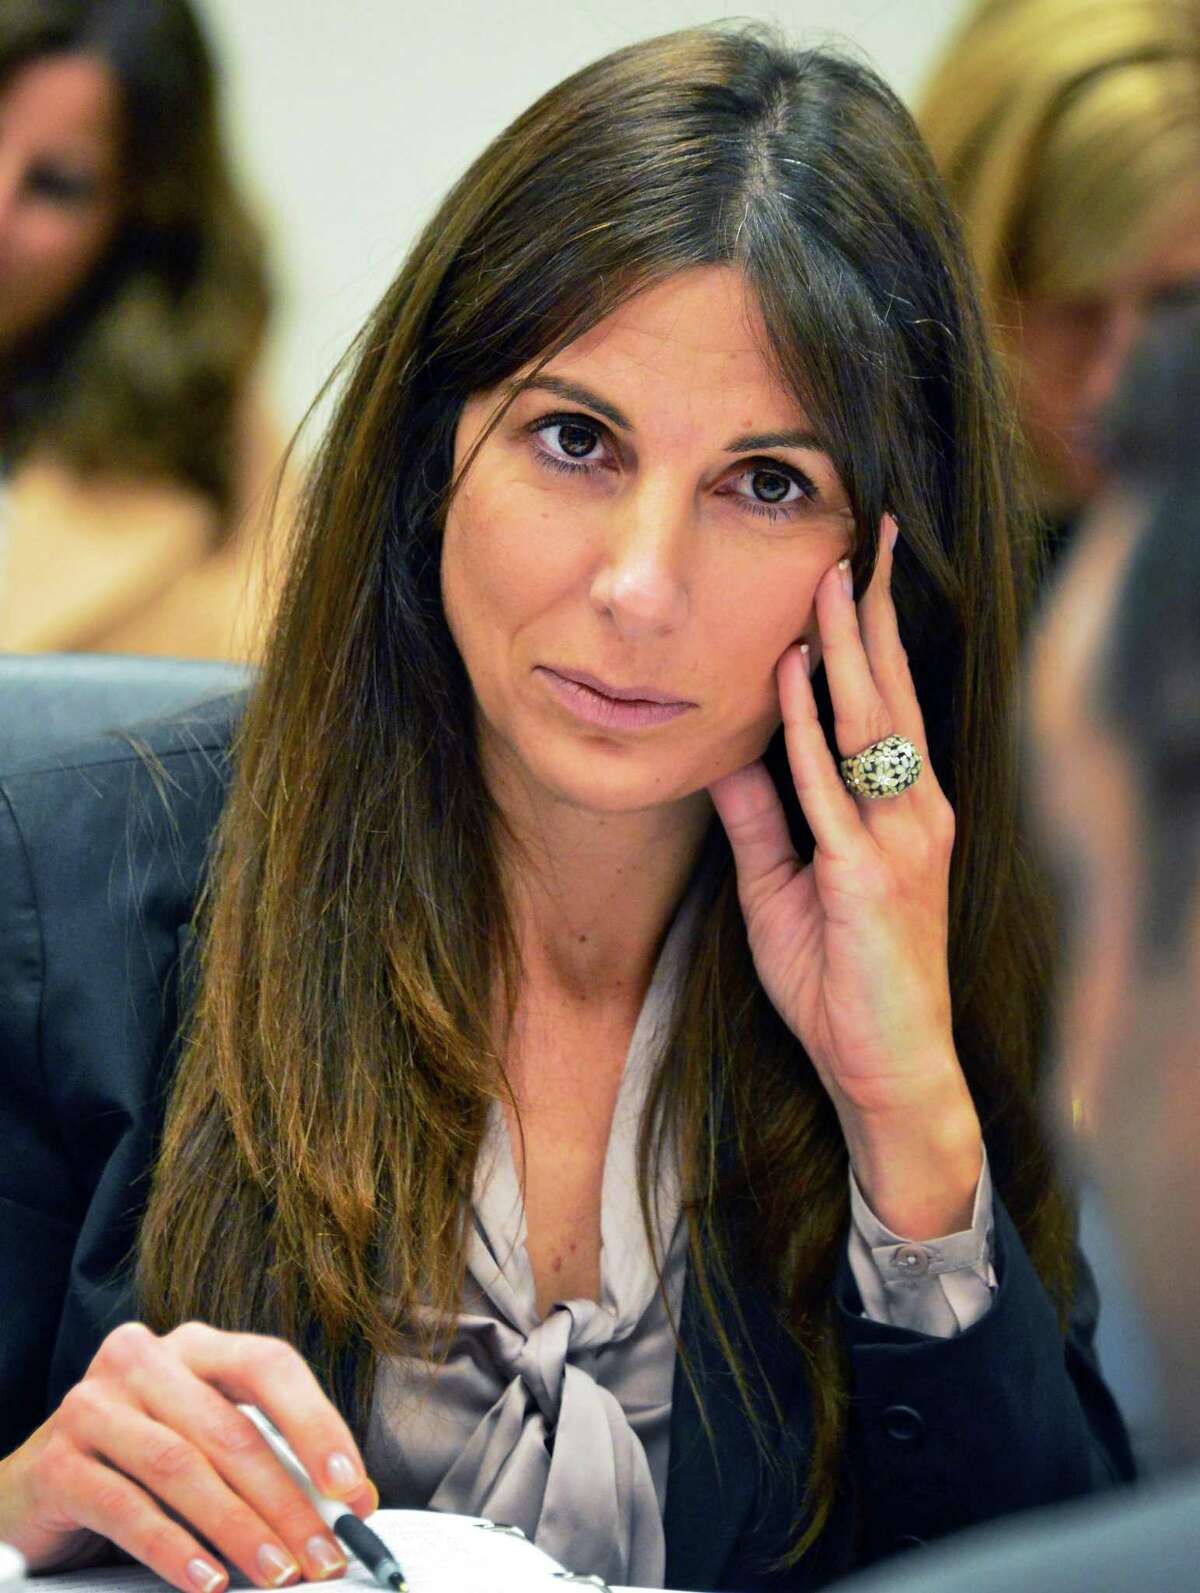 New York state Inspector General Letizia Tagliafierro, seen here in 2013, found that the Empire State College facilities director who served from 2010 until 2019 racked up more than $31,000 in 171 unauthorized purchases on the college's credit card.  (John Carl D'Annibale / Times Union) “This individual wasted taxpayer dollars on lavish personal items and abused the public’s trust,” Tagliafierro said in a statement. “We found that he was able to get away with his selfish scheme because of absent supervision and lax controls.